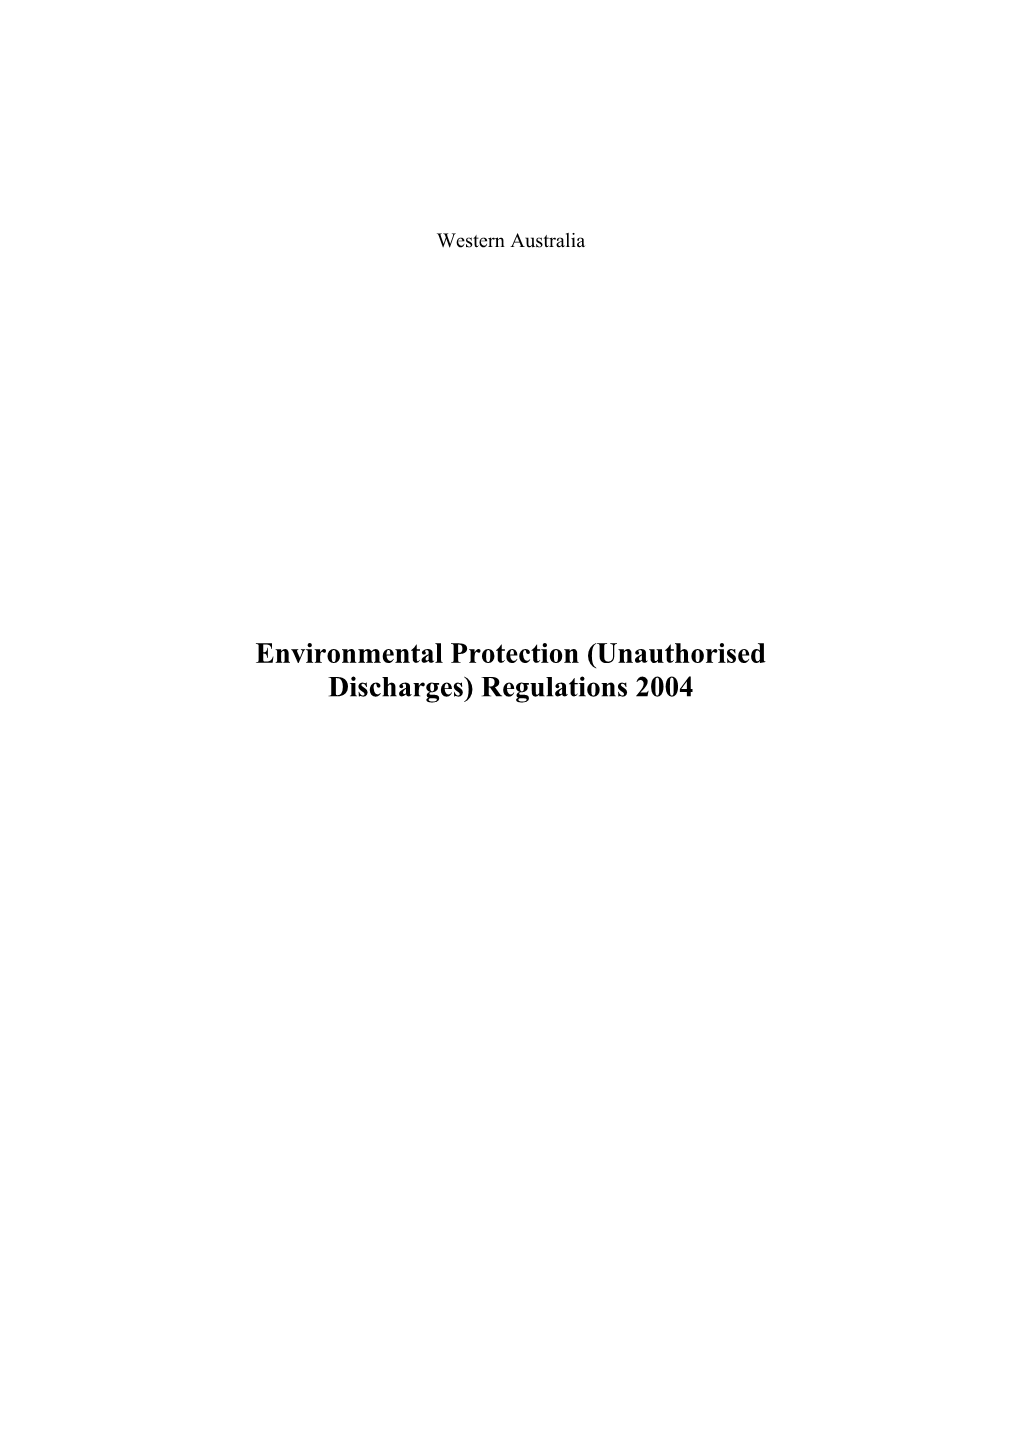 Environmental Protection (Unauthorised Discharges) Regulations 2004 - 00-A0-05